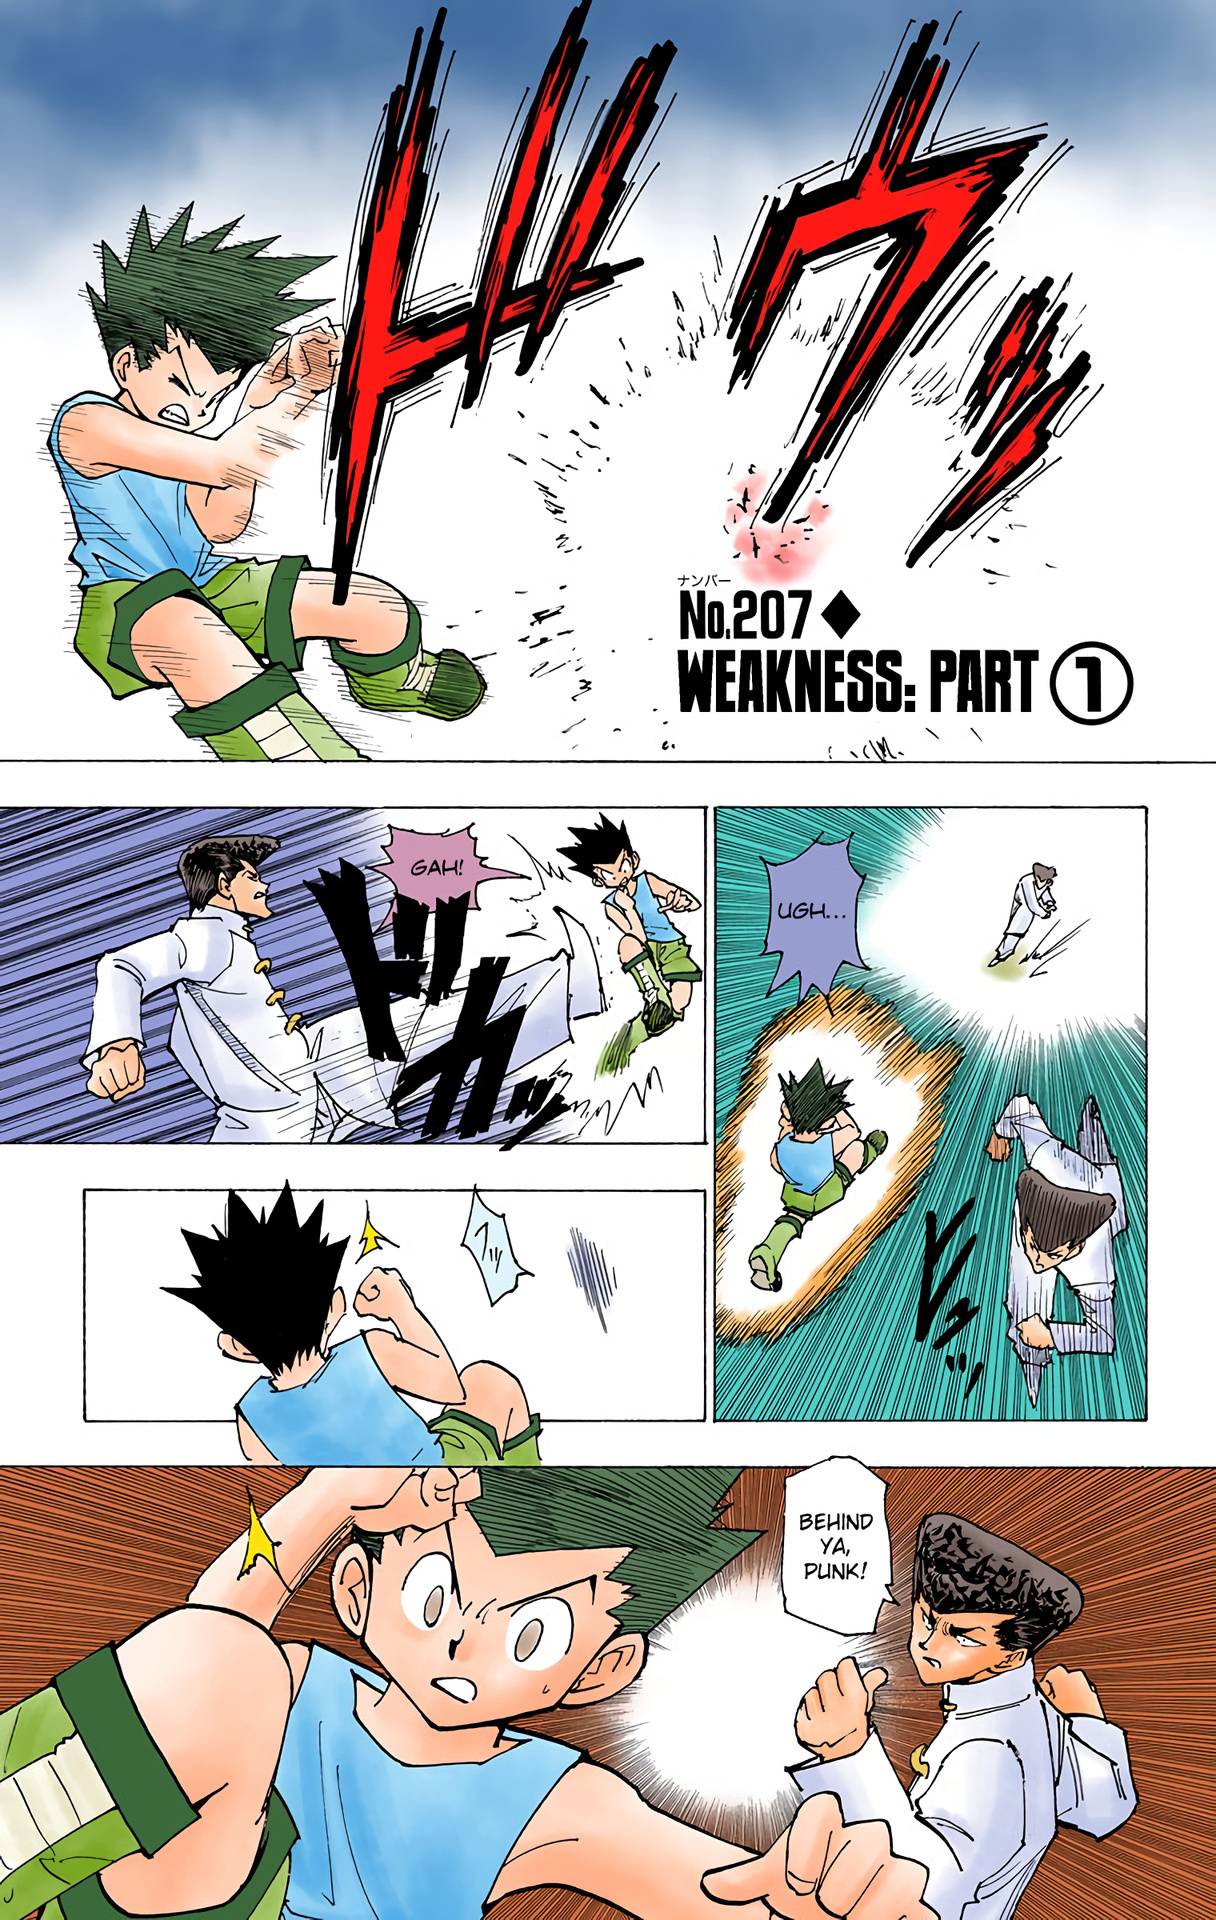 Hunter x Hunter (Full Color) Vol.20 Chapter 207: Weakness